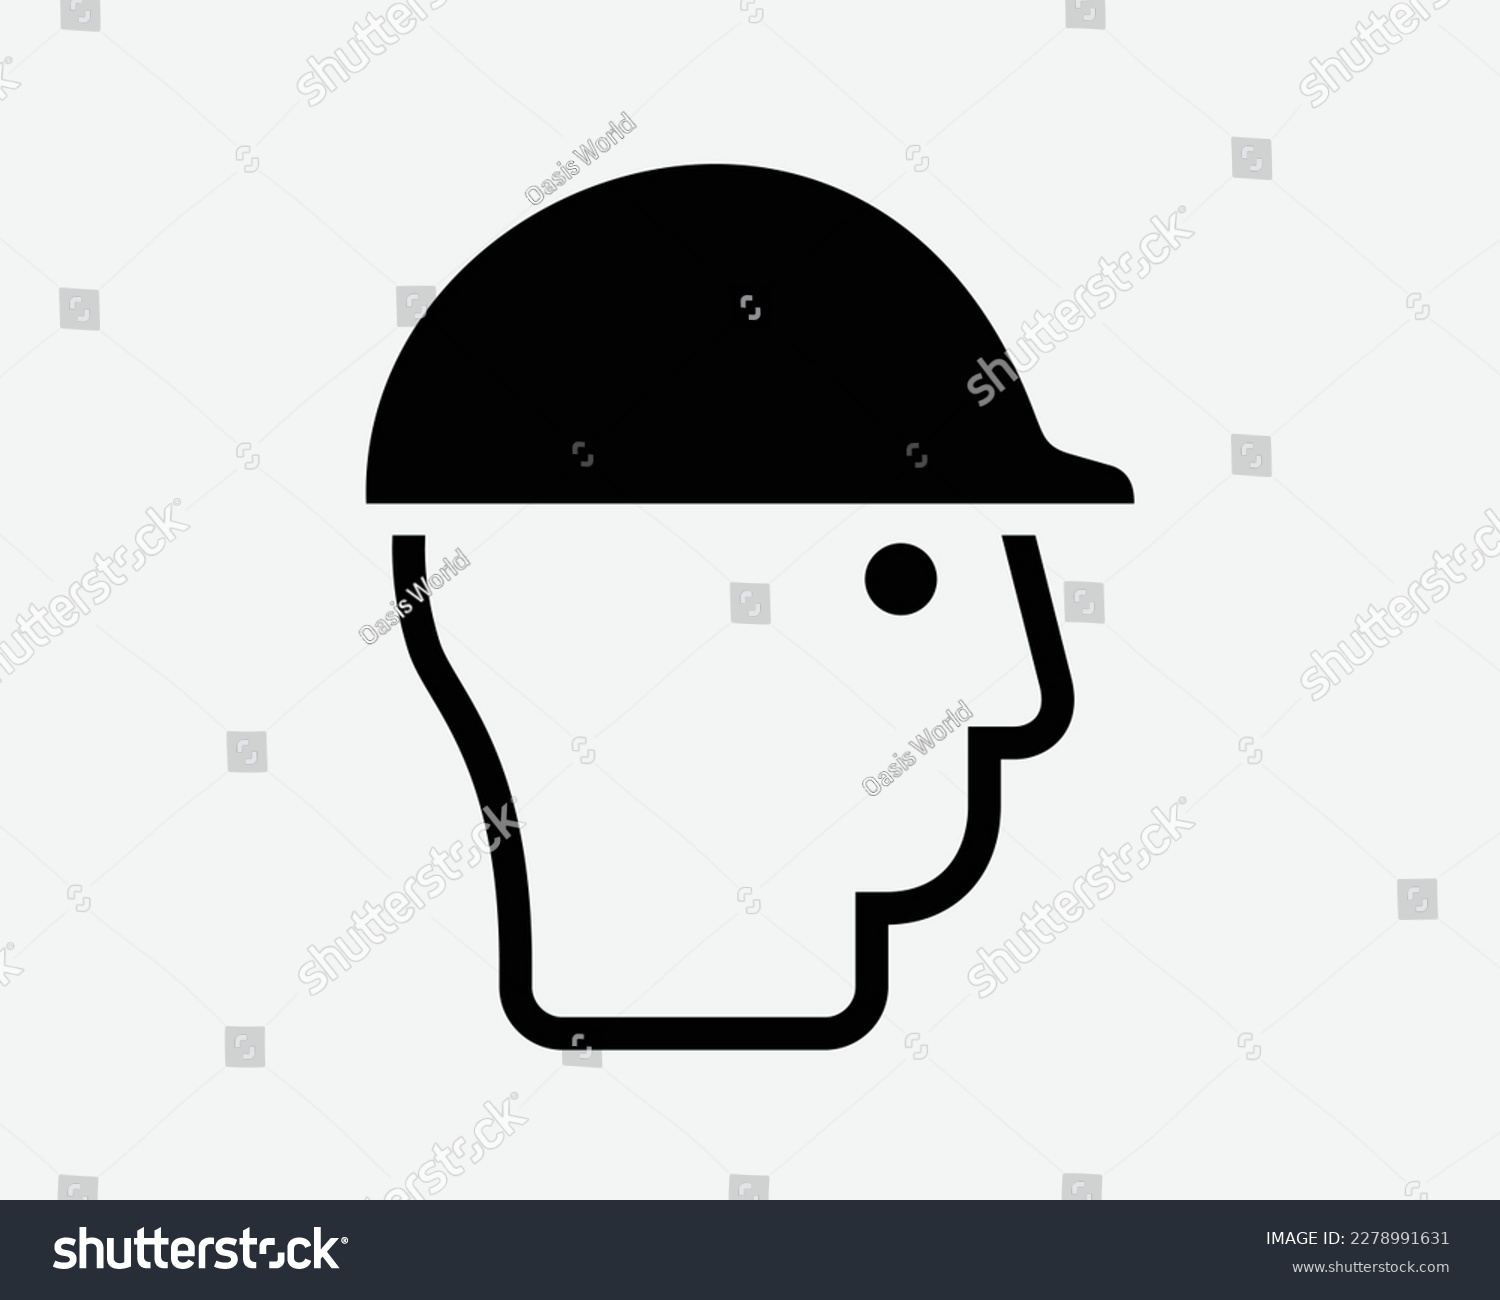 SVG of Head Protection Wear Wearing Construction Hard Hat Helmet Black White Silhouette Symbol Icon Sign Graphic Clipart Artwork Illustration Pictogram Vector svg